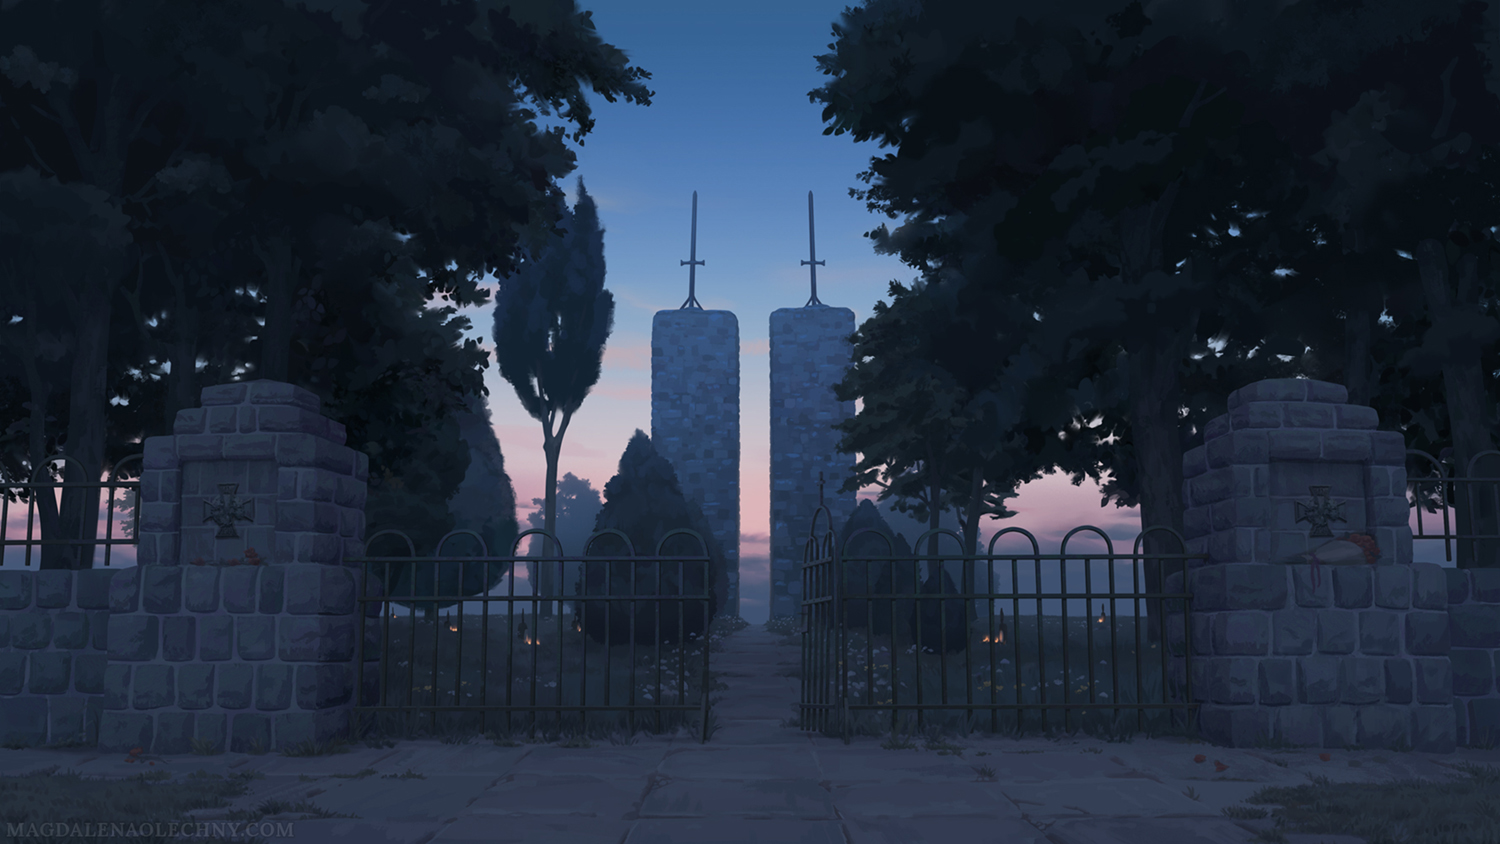 A digital illustration depicting a cemetery Patria in Staszkówka, Poland. The evening sky is the brightest part of the image. In the foreground, there is an open gate and a path leading to two stone towers with swords on their tops. Between the gate and the towers, there are headstones with small lights. The graves are surrounded by trees.